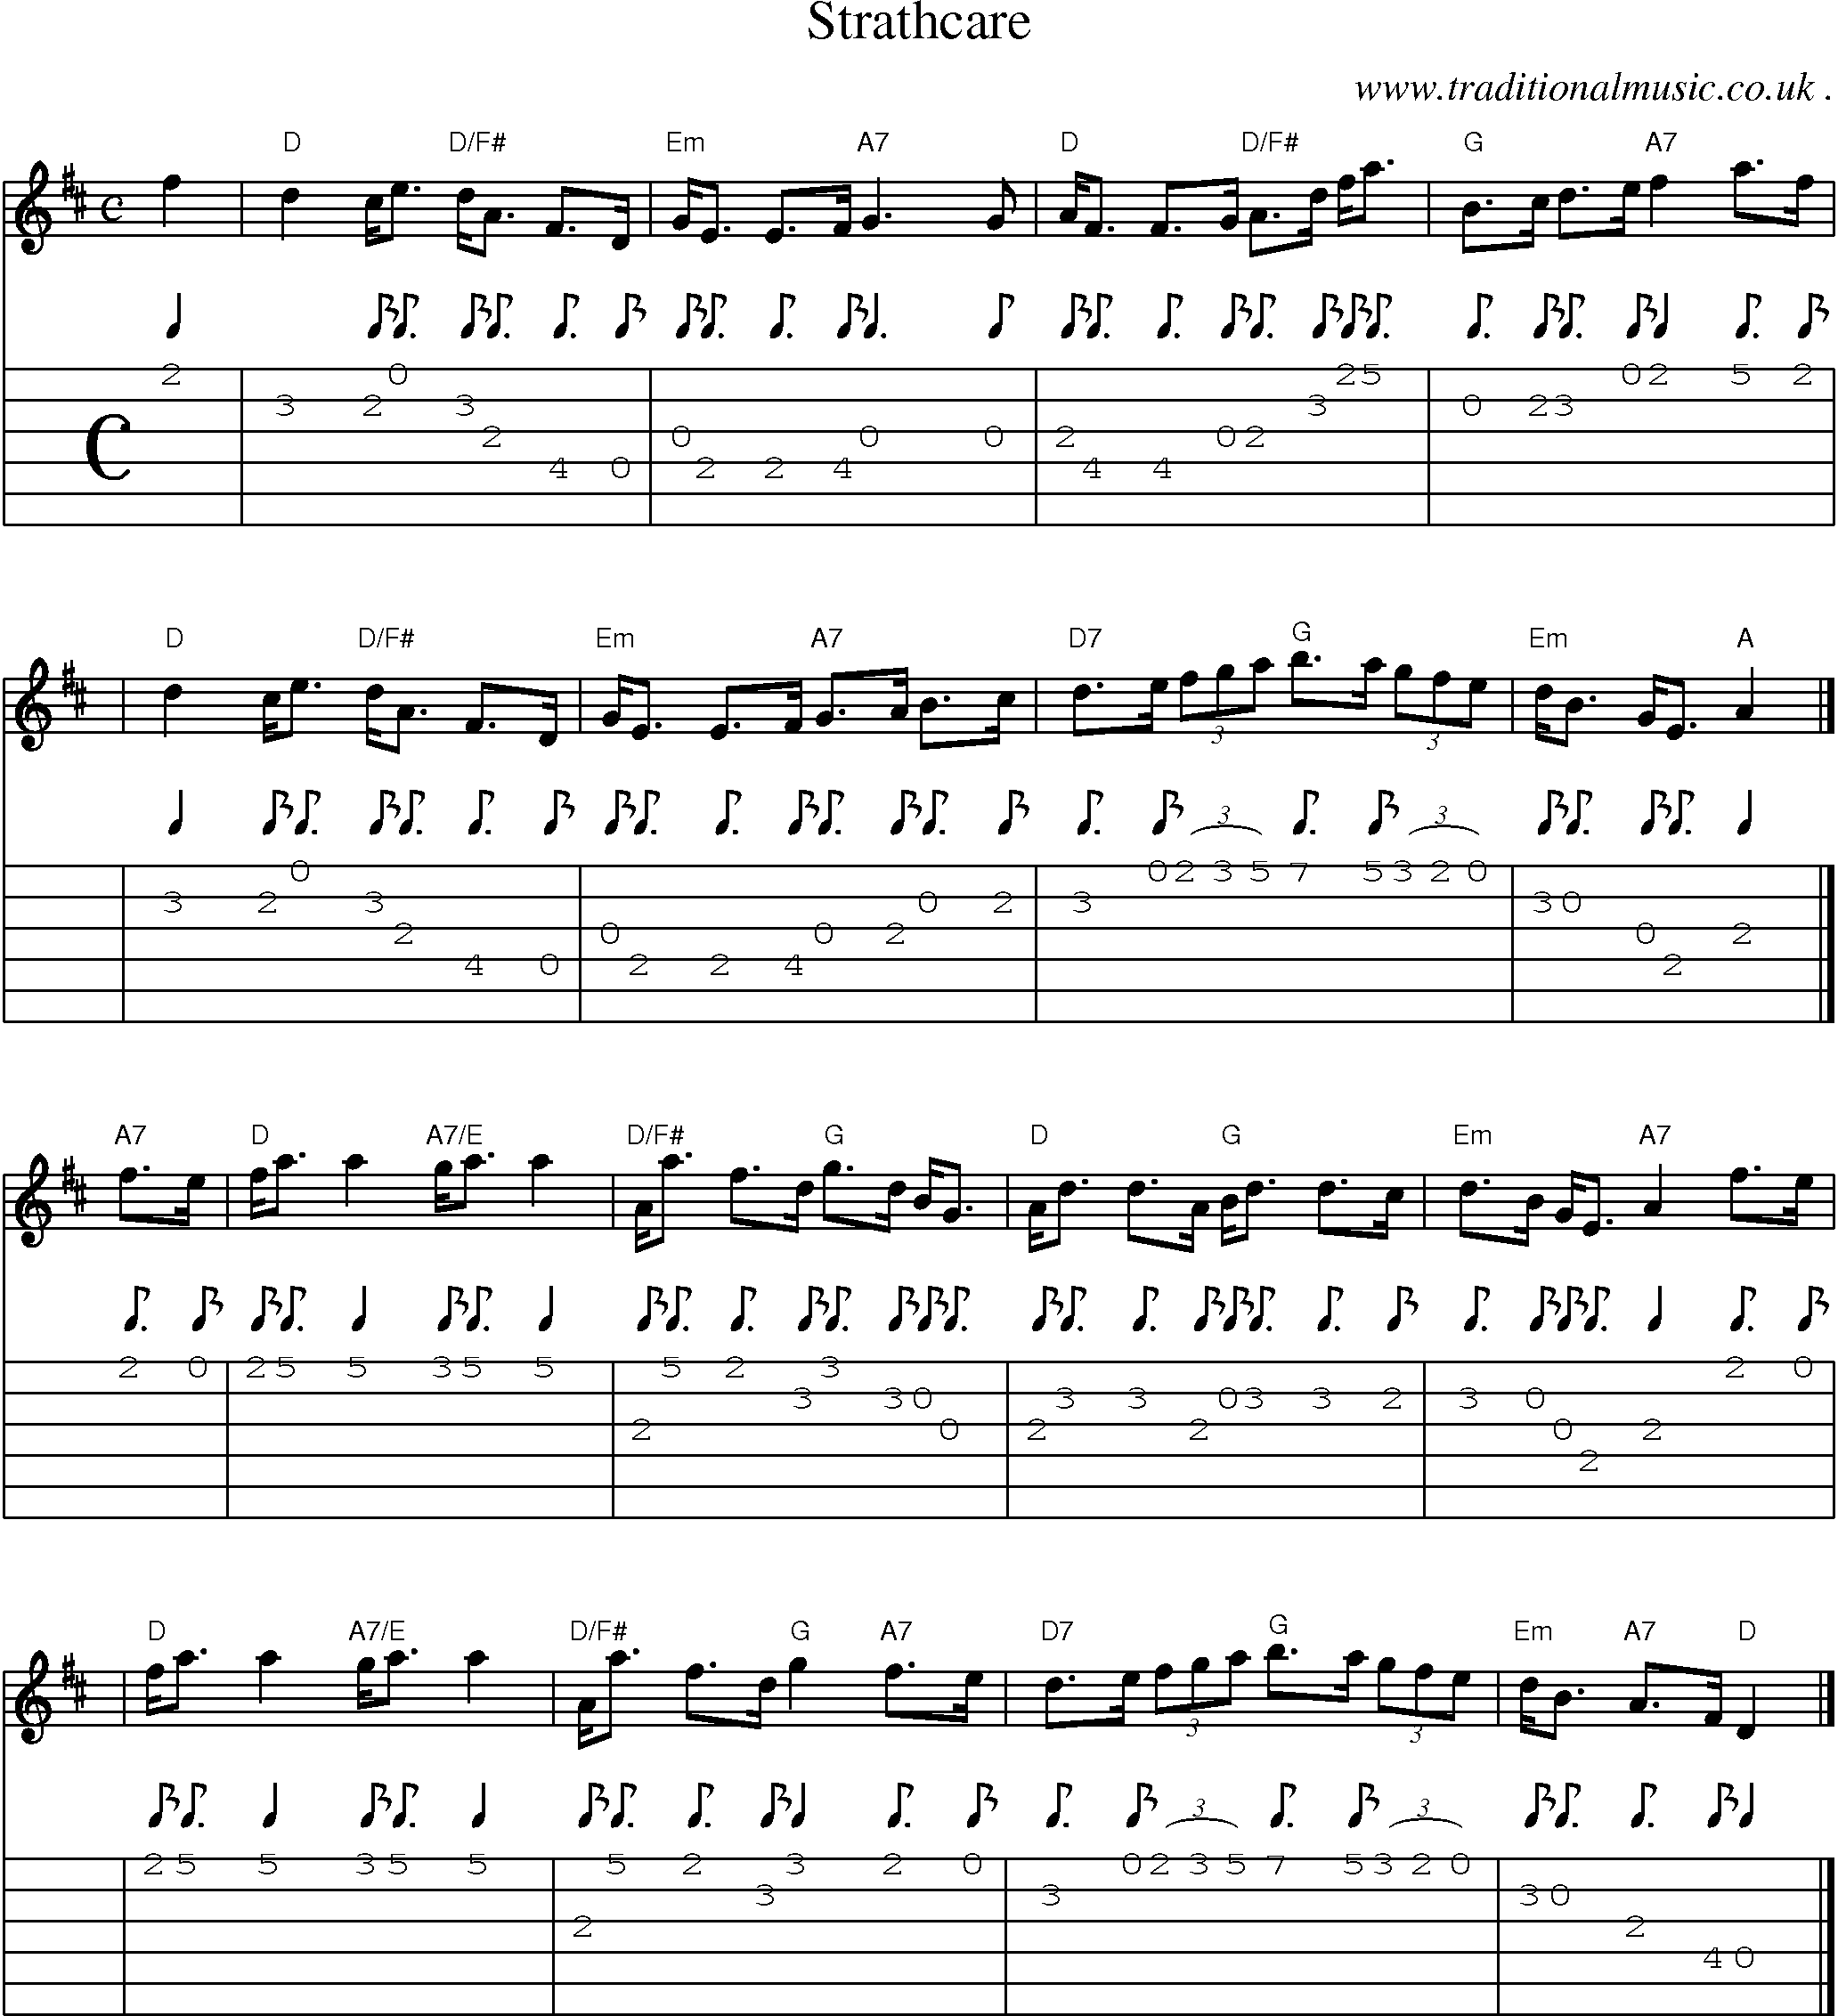 Sheet-music  score, Chords and Guitar Tabs for Strathcare